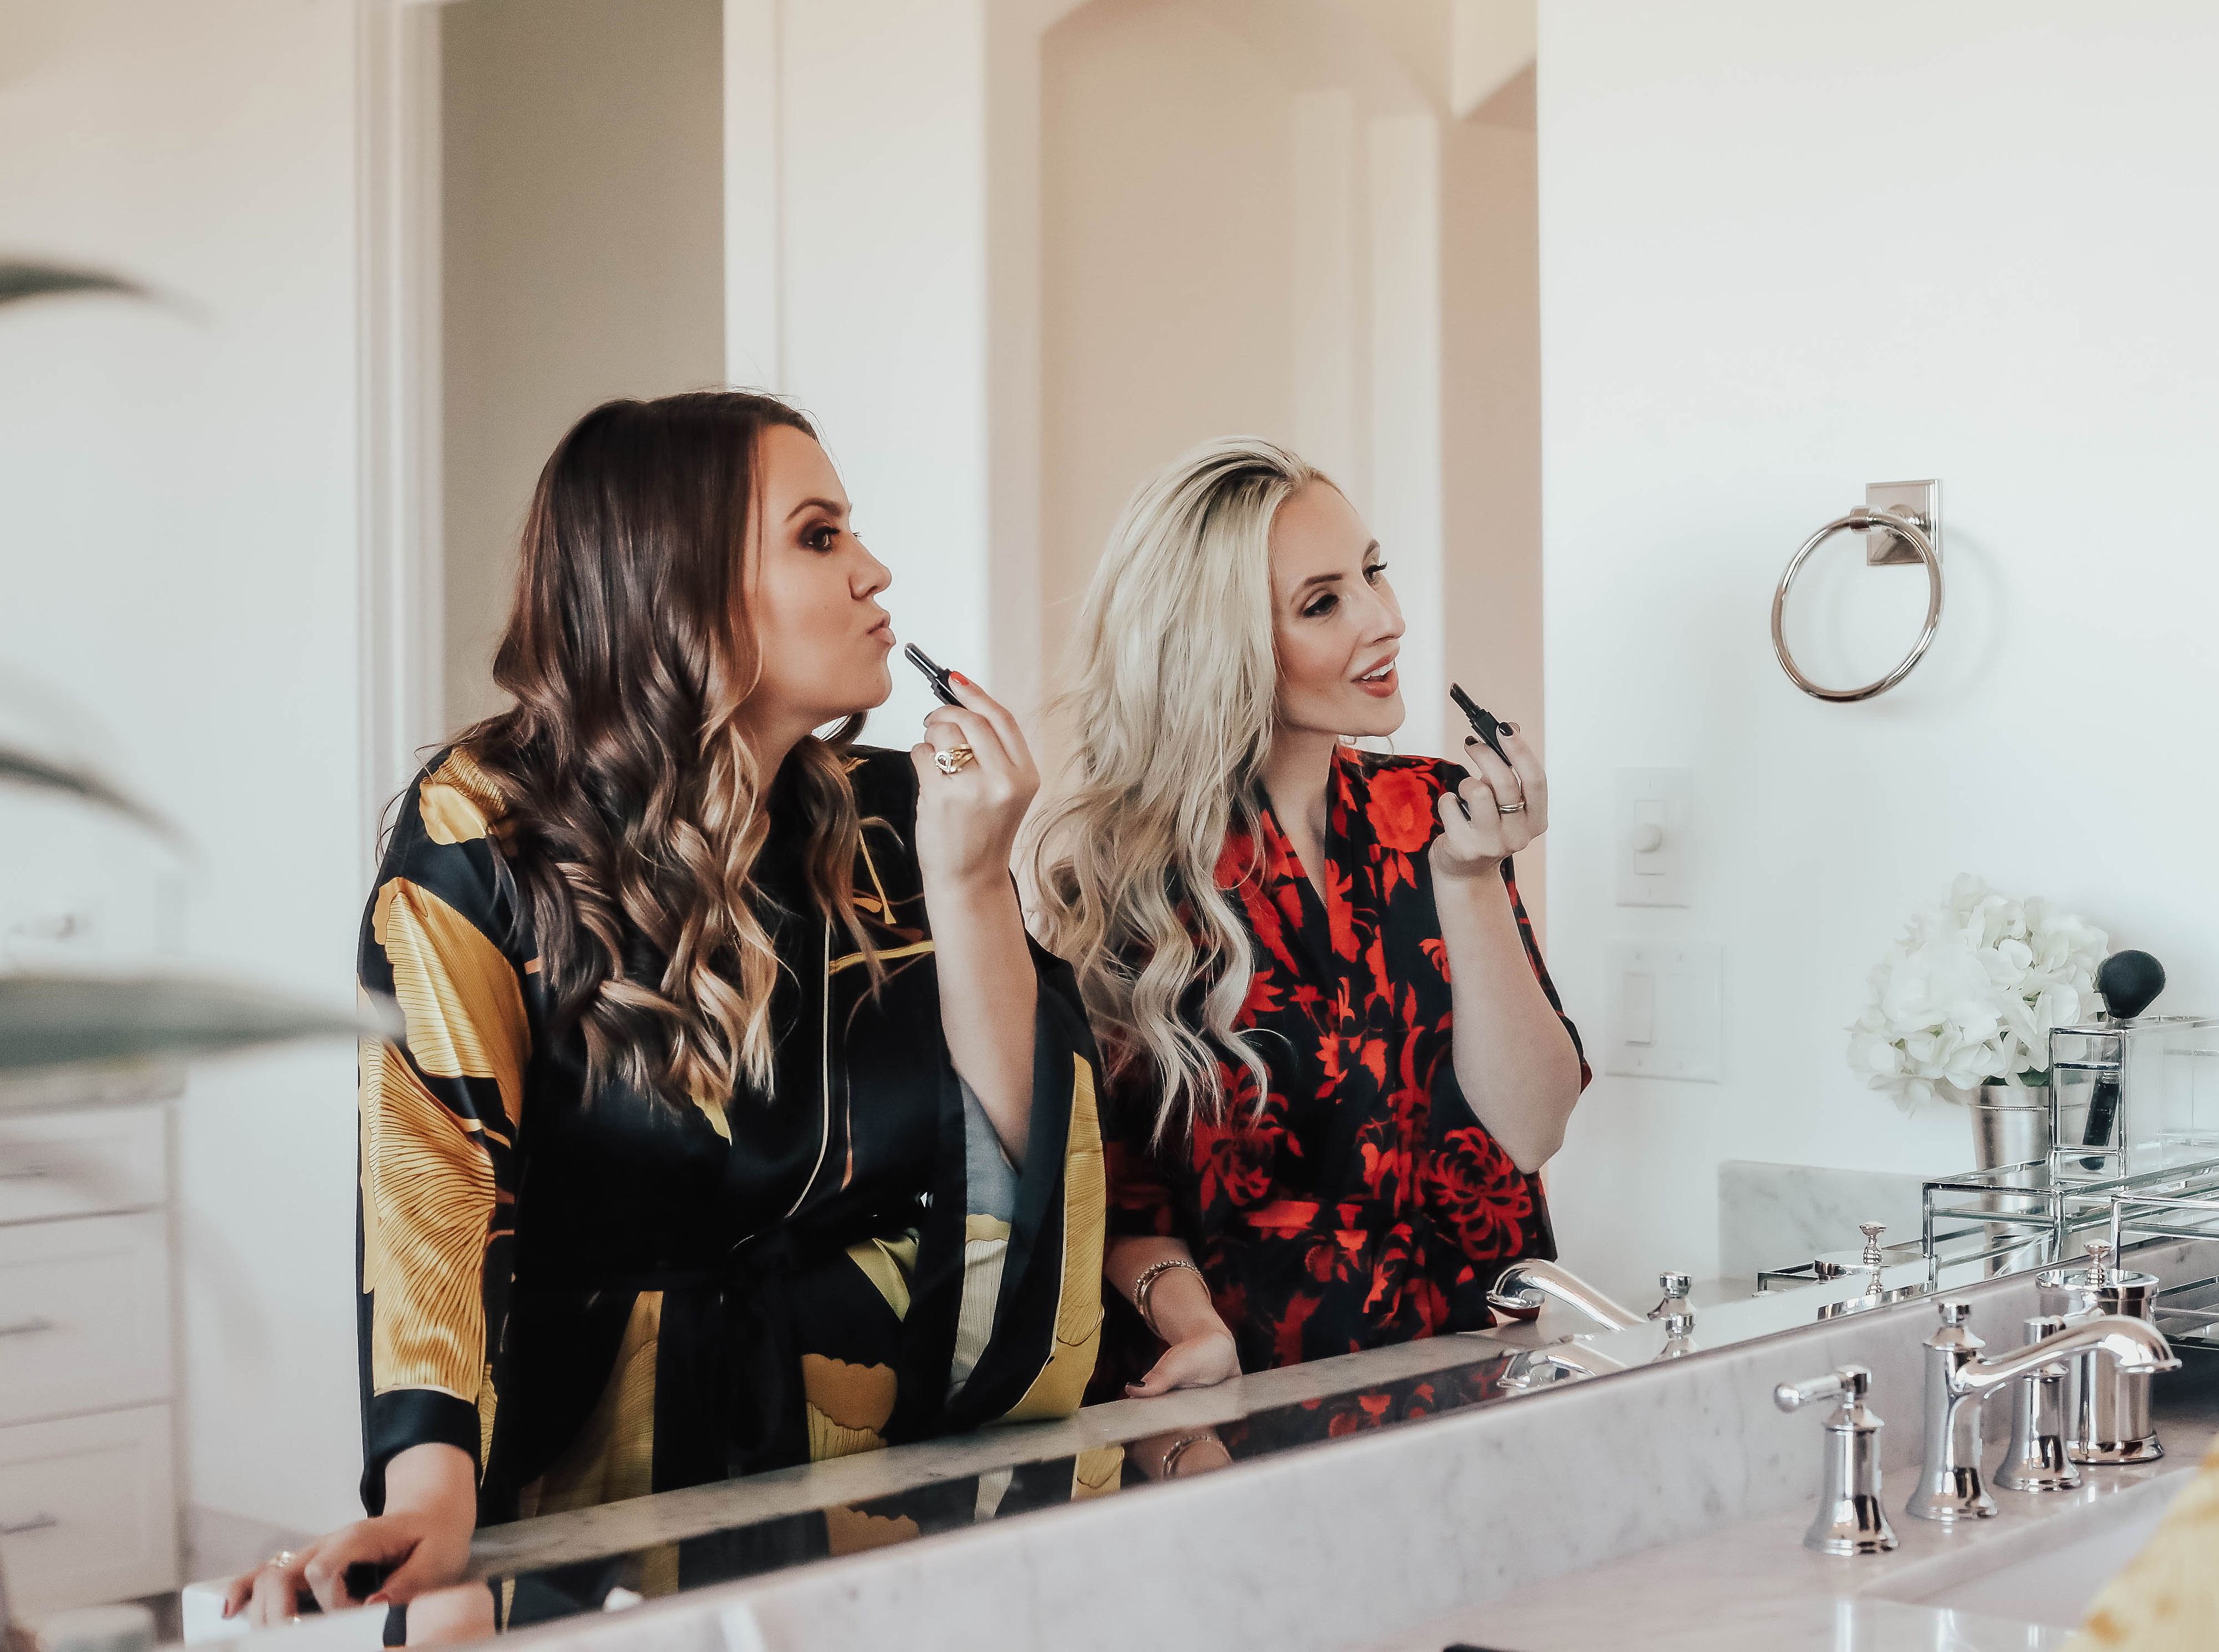 Reno Nevada Blogger, Emily Farren Wieczorek shares her love for Visionary Gel Lipstick by Shiseido and tells the story of her and Ashley's friendship.